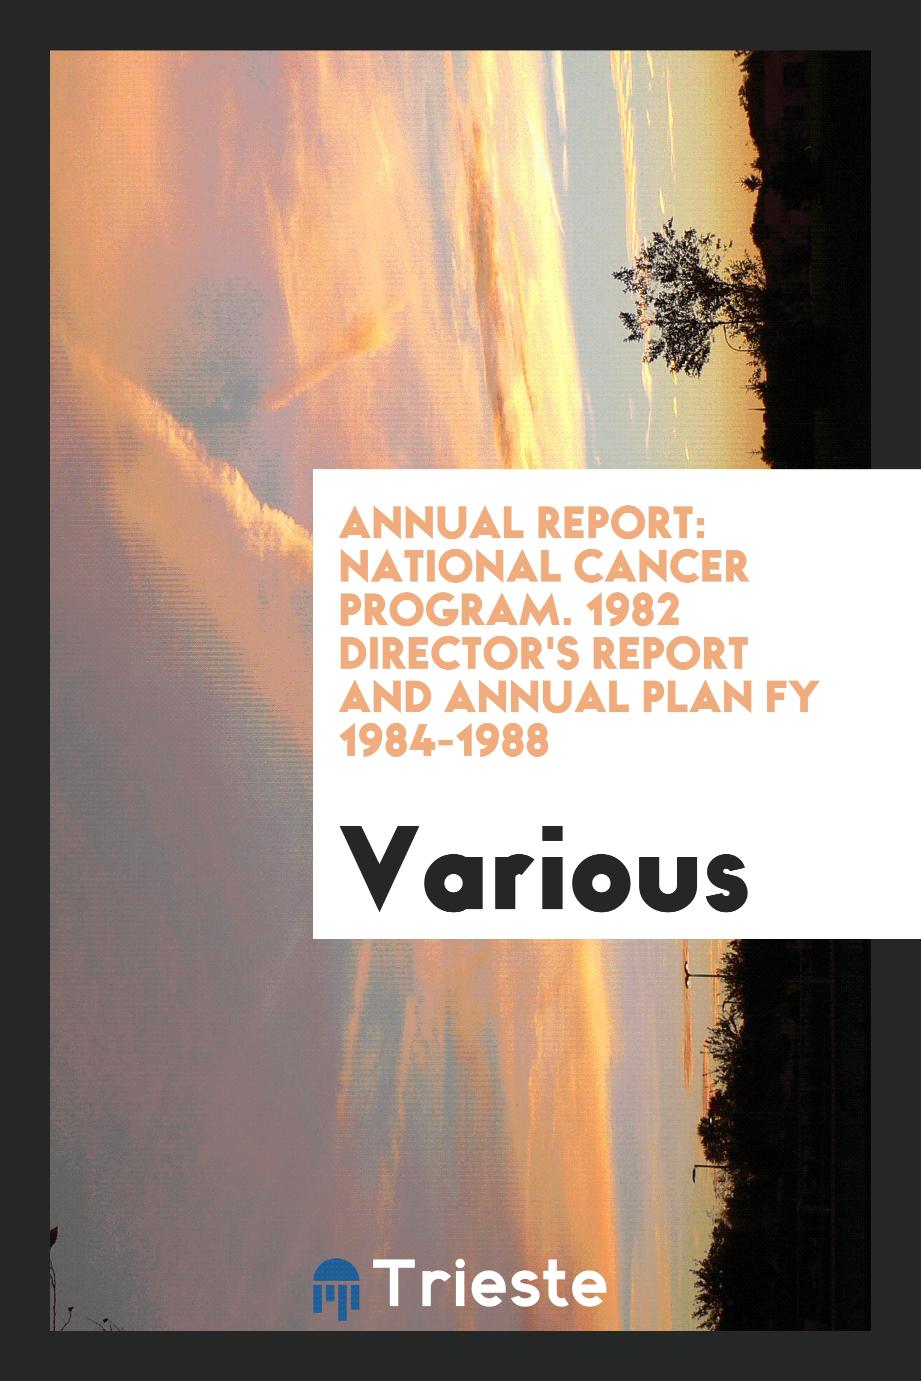 Annual report: National Cancer Program. 1982 Director's Report and Annual Plan FY 1984-1988